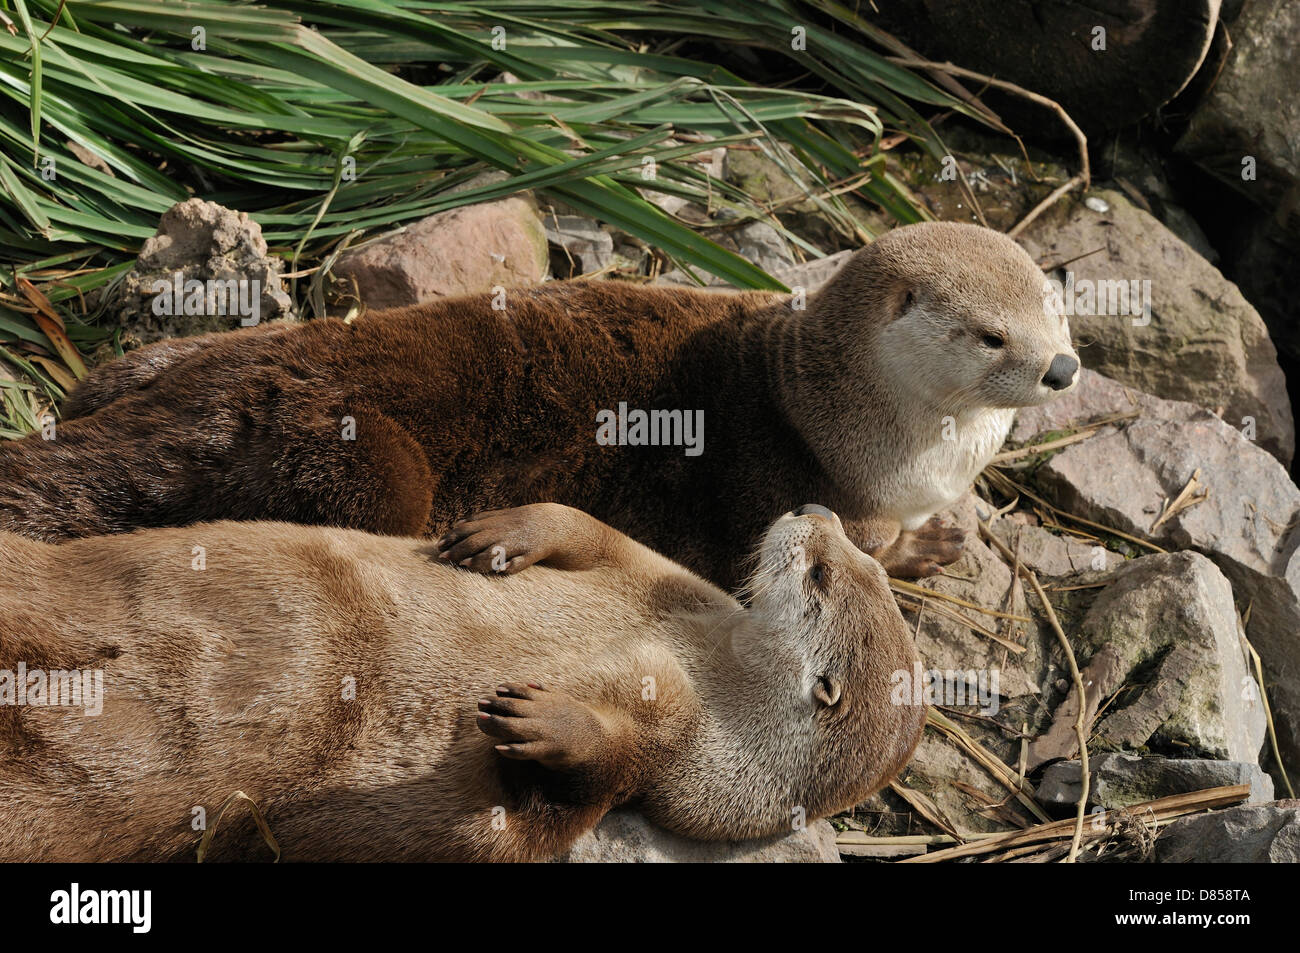 North American River Otter - Lontra canadensis Stock Photo